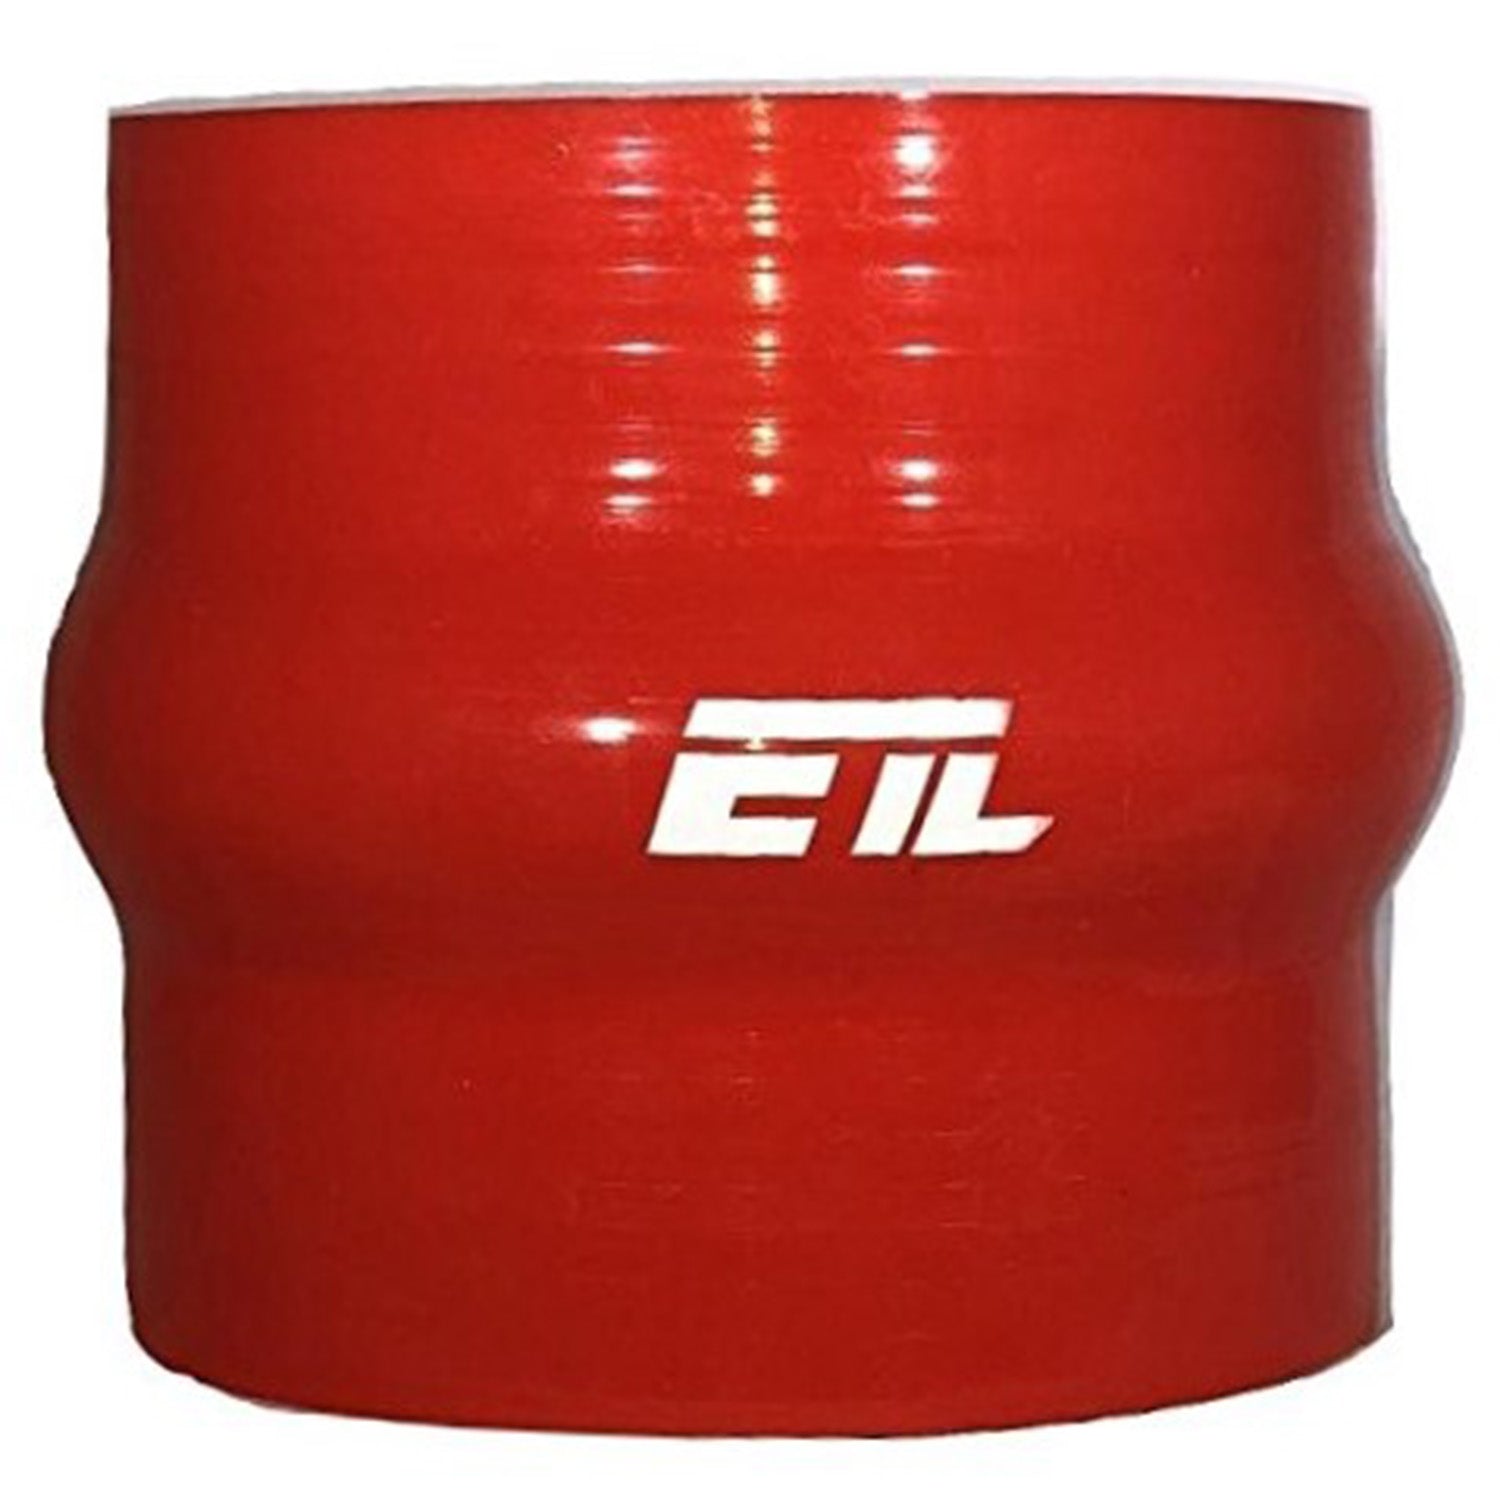 ETL Performance 233027 Silicone Hump Hose 2.75 Inch Diameter 3.00 Inch Red